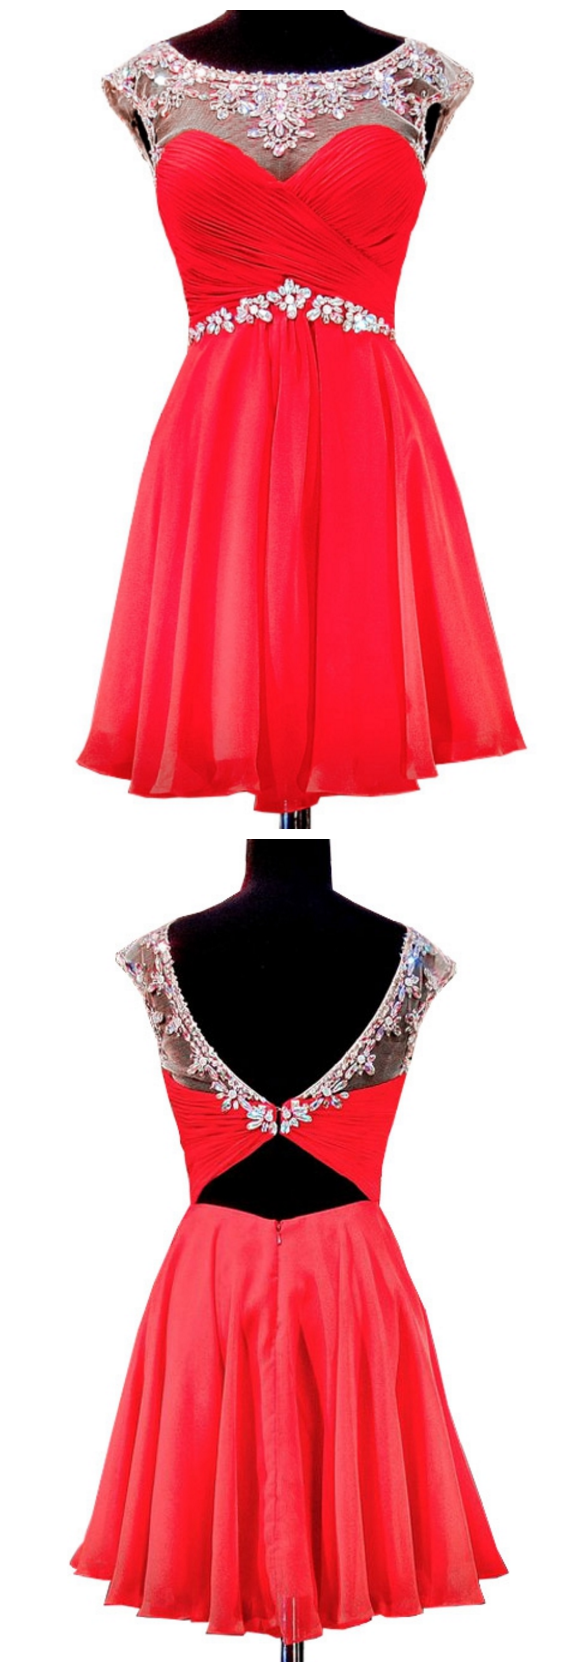 Cute Sweet 16 Dresses Scalloped Cap Sleeve Beaded Crystals 8th Grade Prom Backless Red Chiffon Homecoming Dress